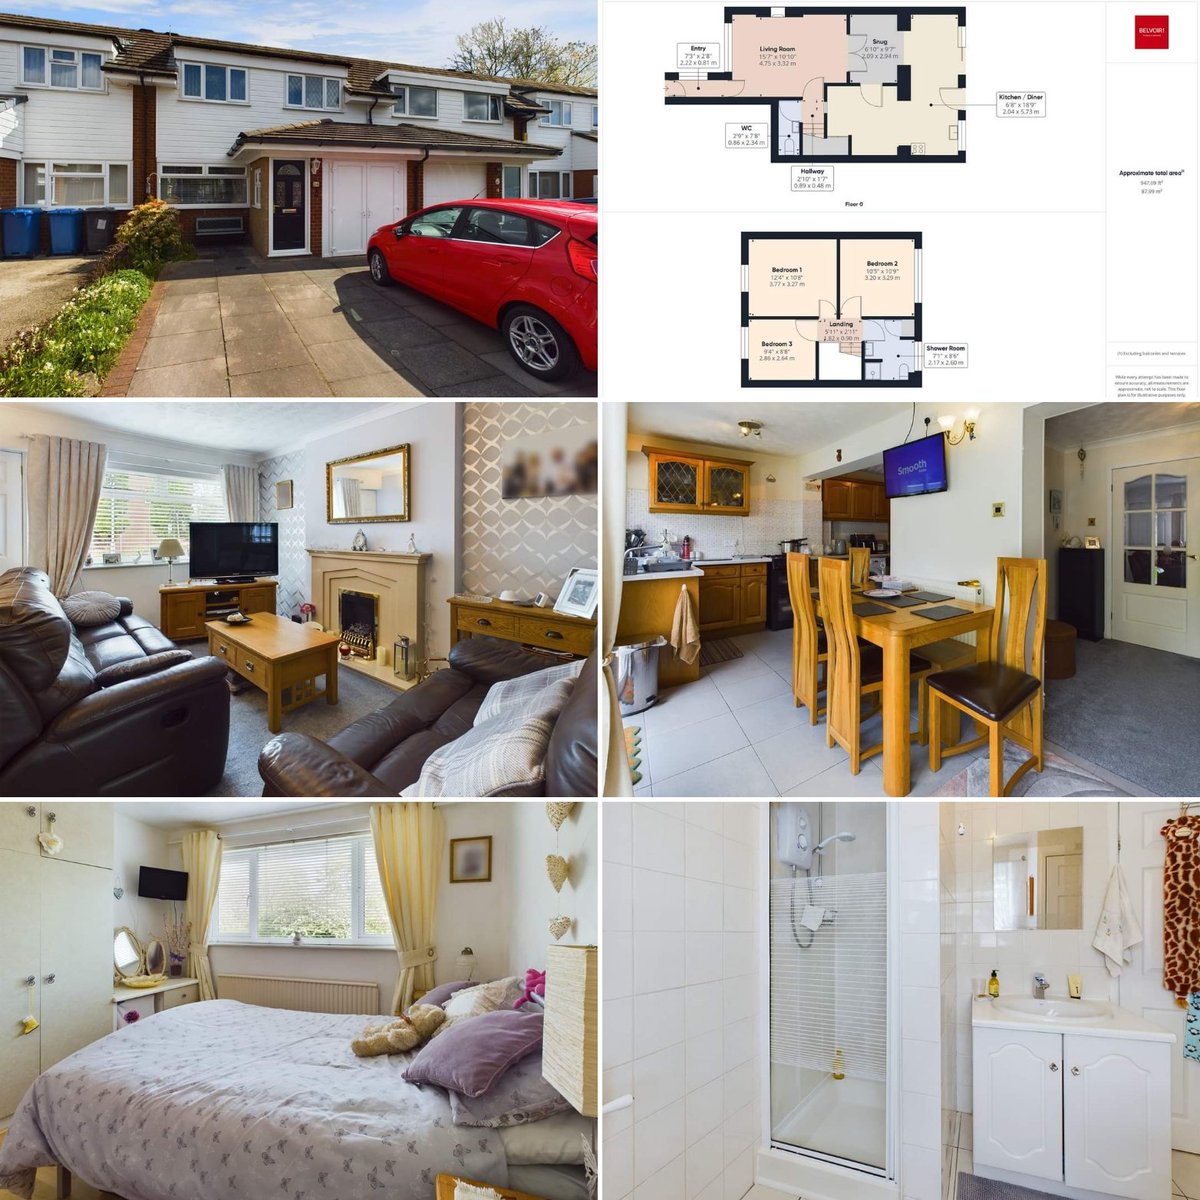 ✨✨✨New SALES Instruction✨✨✨ Duckworth Grove, Padgate, Warrington, WA2 Price : £240,000 🏘 Mews property 🚗 Driveway & Garage 👨‍👩‍👧‍👦 No Chain 🛏 3 Bedrooms ❤️ Freehold Contact our friendly team on Call : 01925 636 855 Email : sales.warrington@belvoir.co.uk